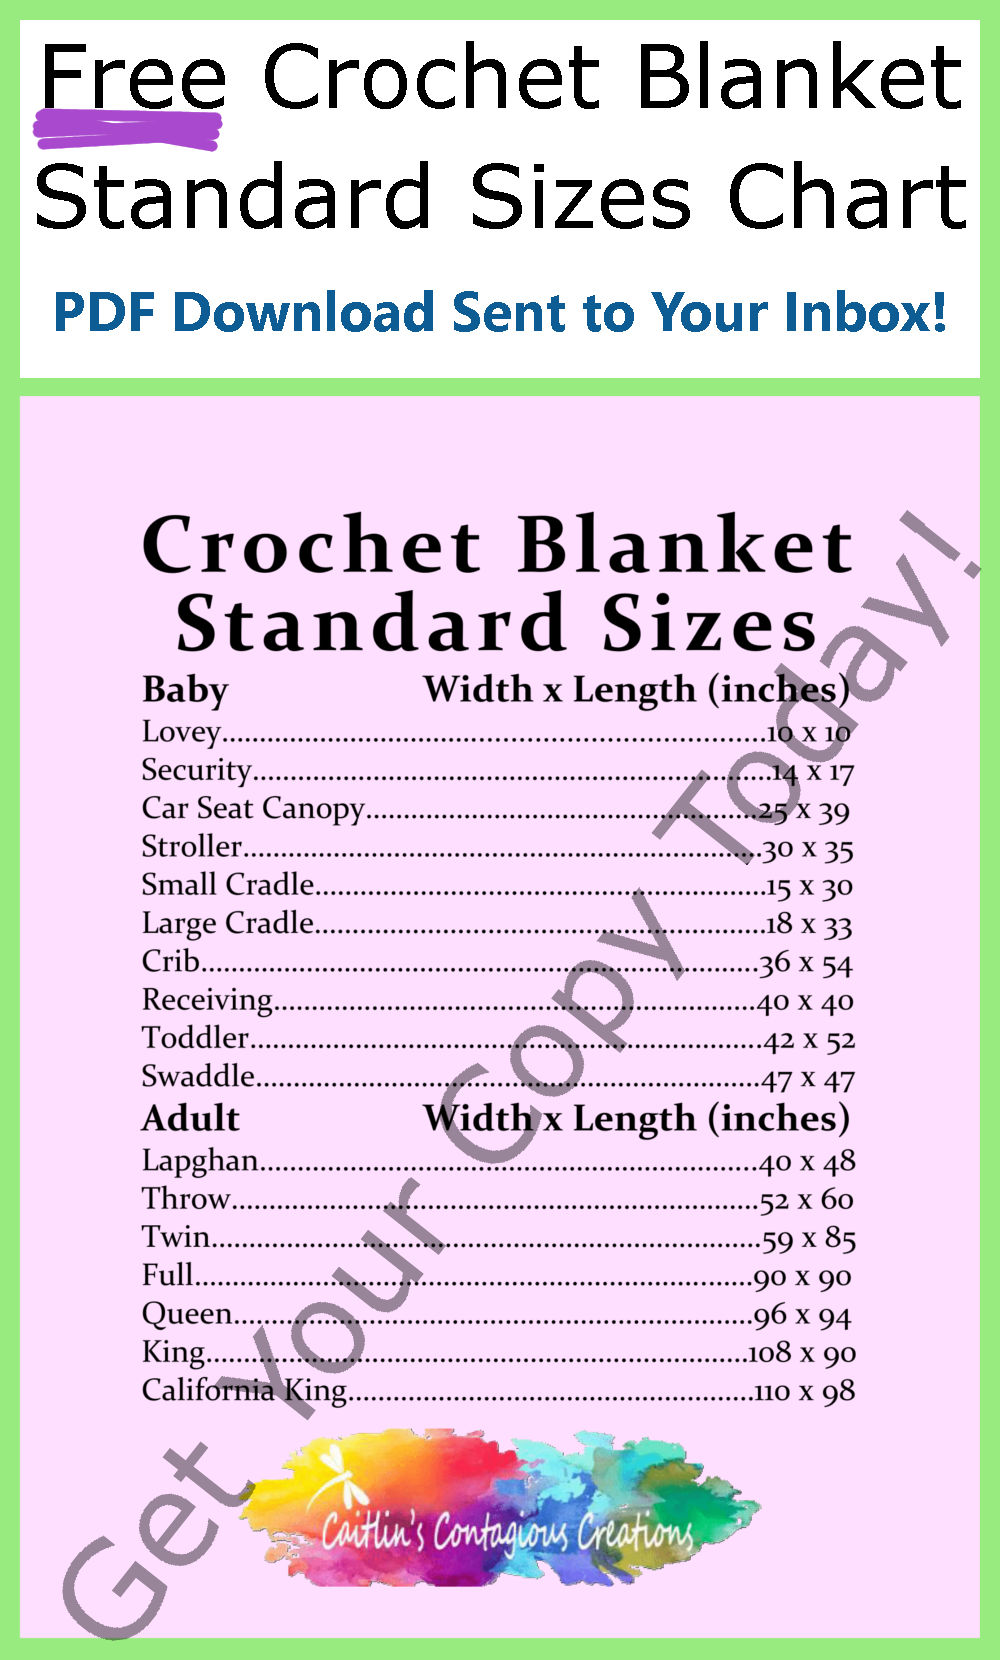 Free Crochet Blanket Standard Size Quick Guide in a printable PDF format. Great cheat sheet for crocheters of all skill levels!